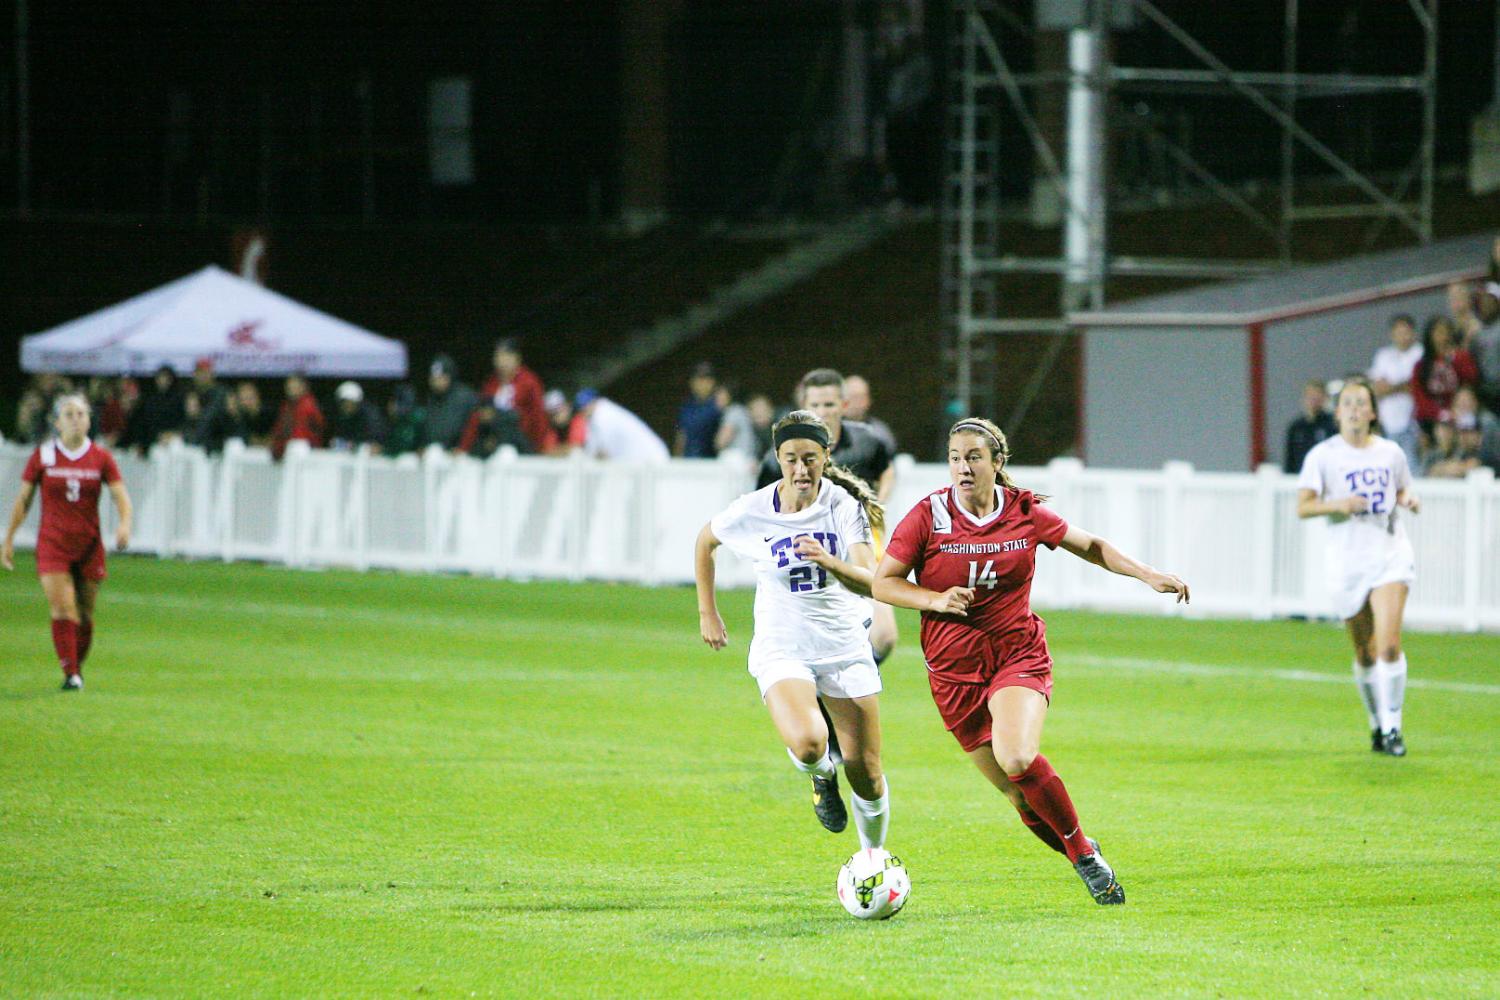 Redshirt junior forward Beau Bremer dribbles the ball past a TCU defender at Lower Soccer Field, Aug. 22, 2014.